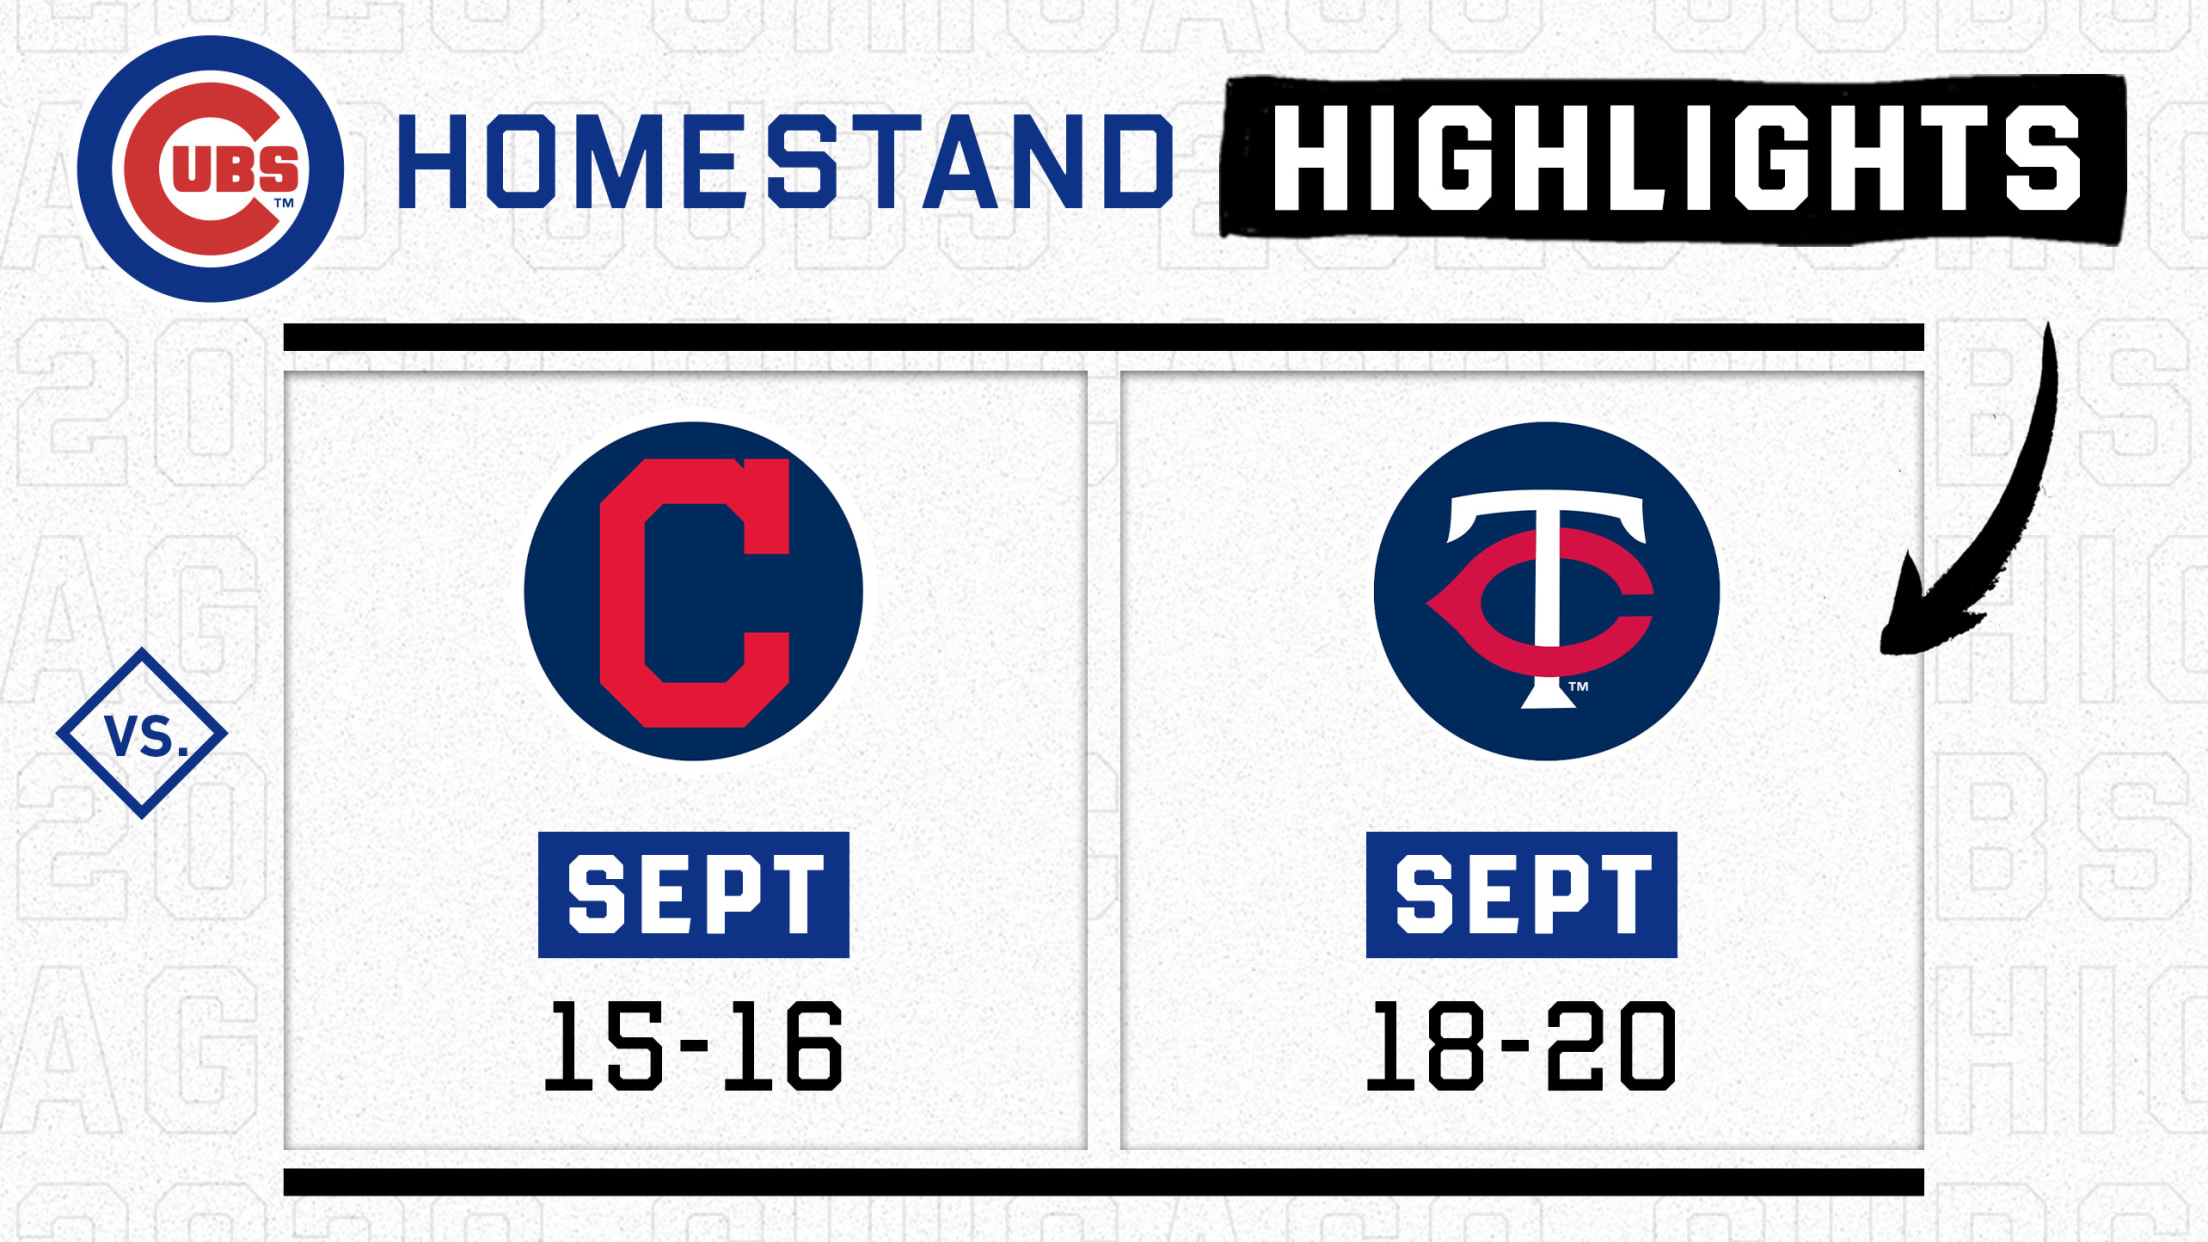 What to Know for this Upcoming Homestand